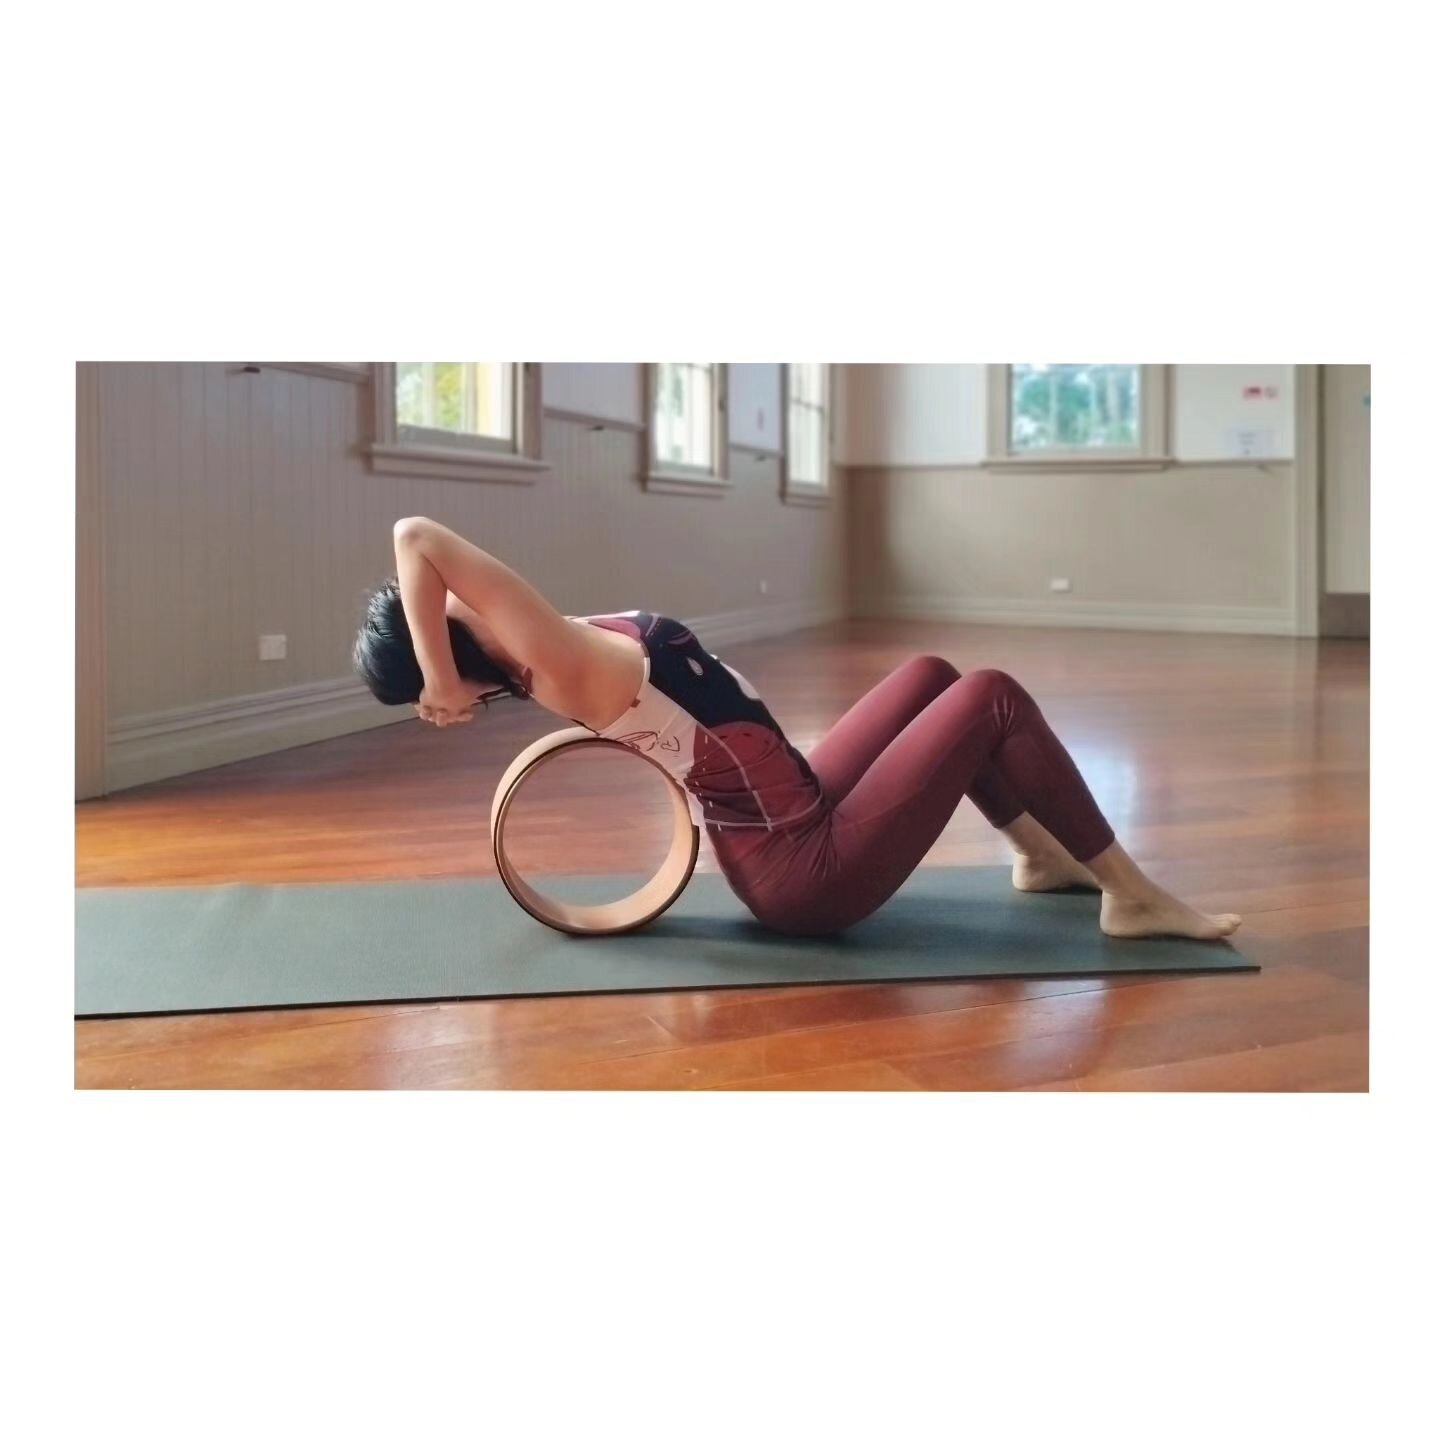 Do Yoga Wheels Work For Back Pain?&nbsp;

Yes! 
 If you are experiencing back pain, one of the most beneficial things you can do is roll your spine along the
yoga wheel.
 This will help to alleviate pain, massaging any kinks or tight muscles out from